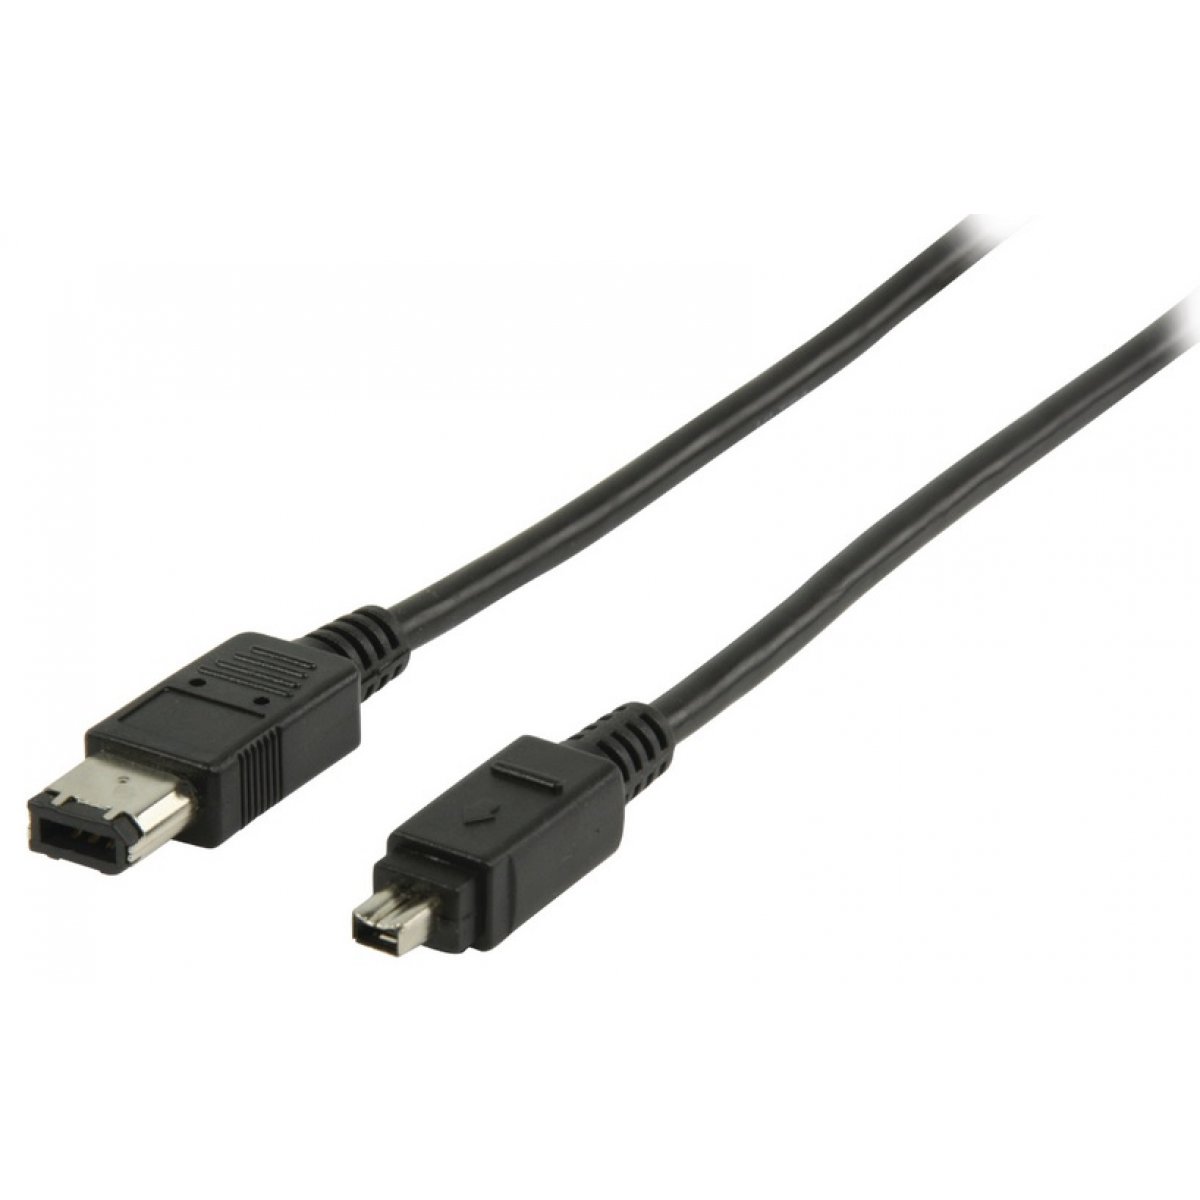 CABLE FIREWIRE 4PIN-6PIN (1M)